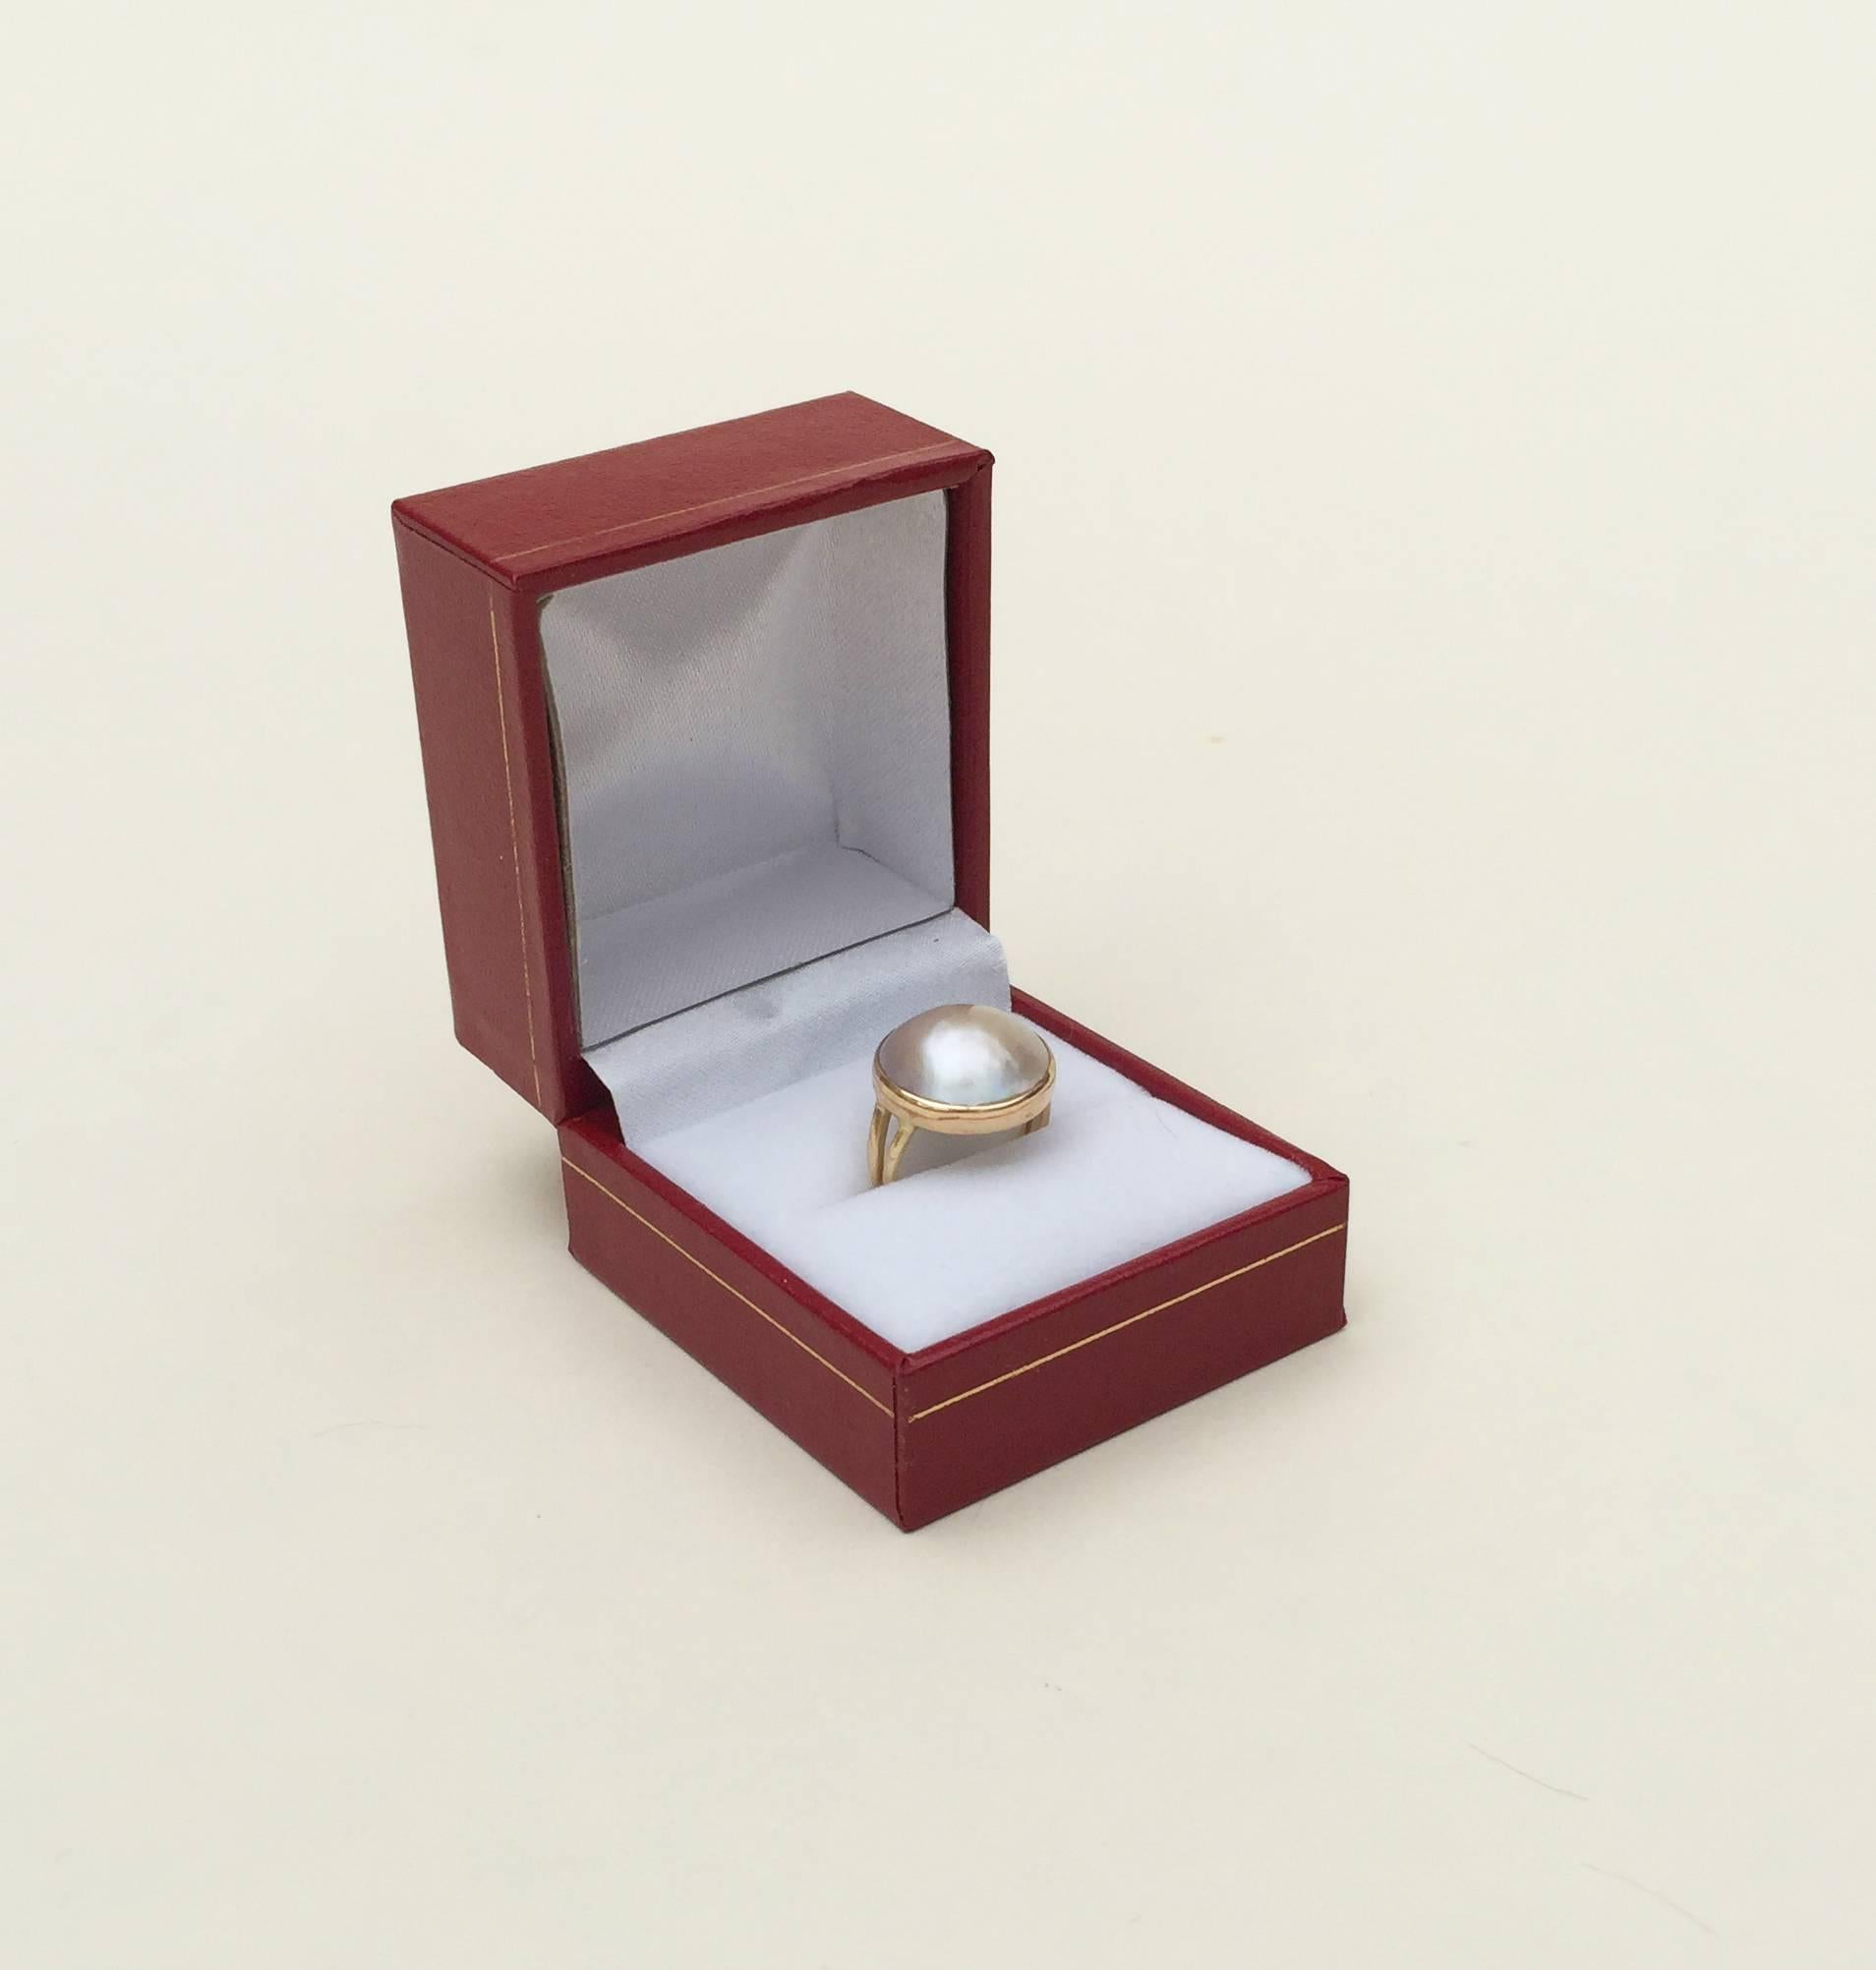 This delicate pearl and 14k yellow gold ring (size 4) has an iridescent glow. The blue gray pearl is elegant, beautiful and has no blemishes. This ring is classic in design, fitting well with any outfit as the perfect final touch for the modern